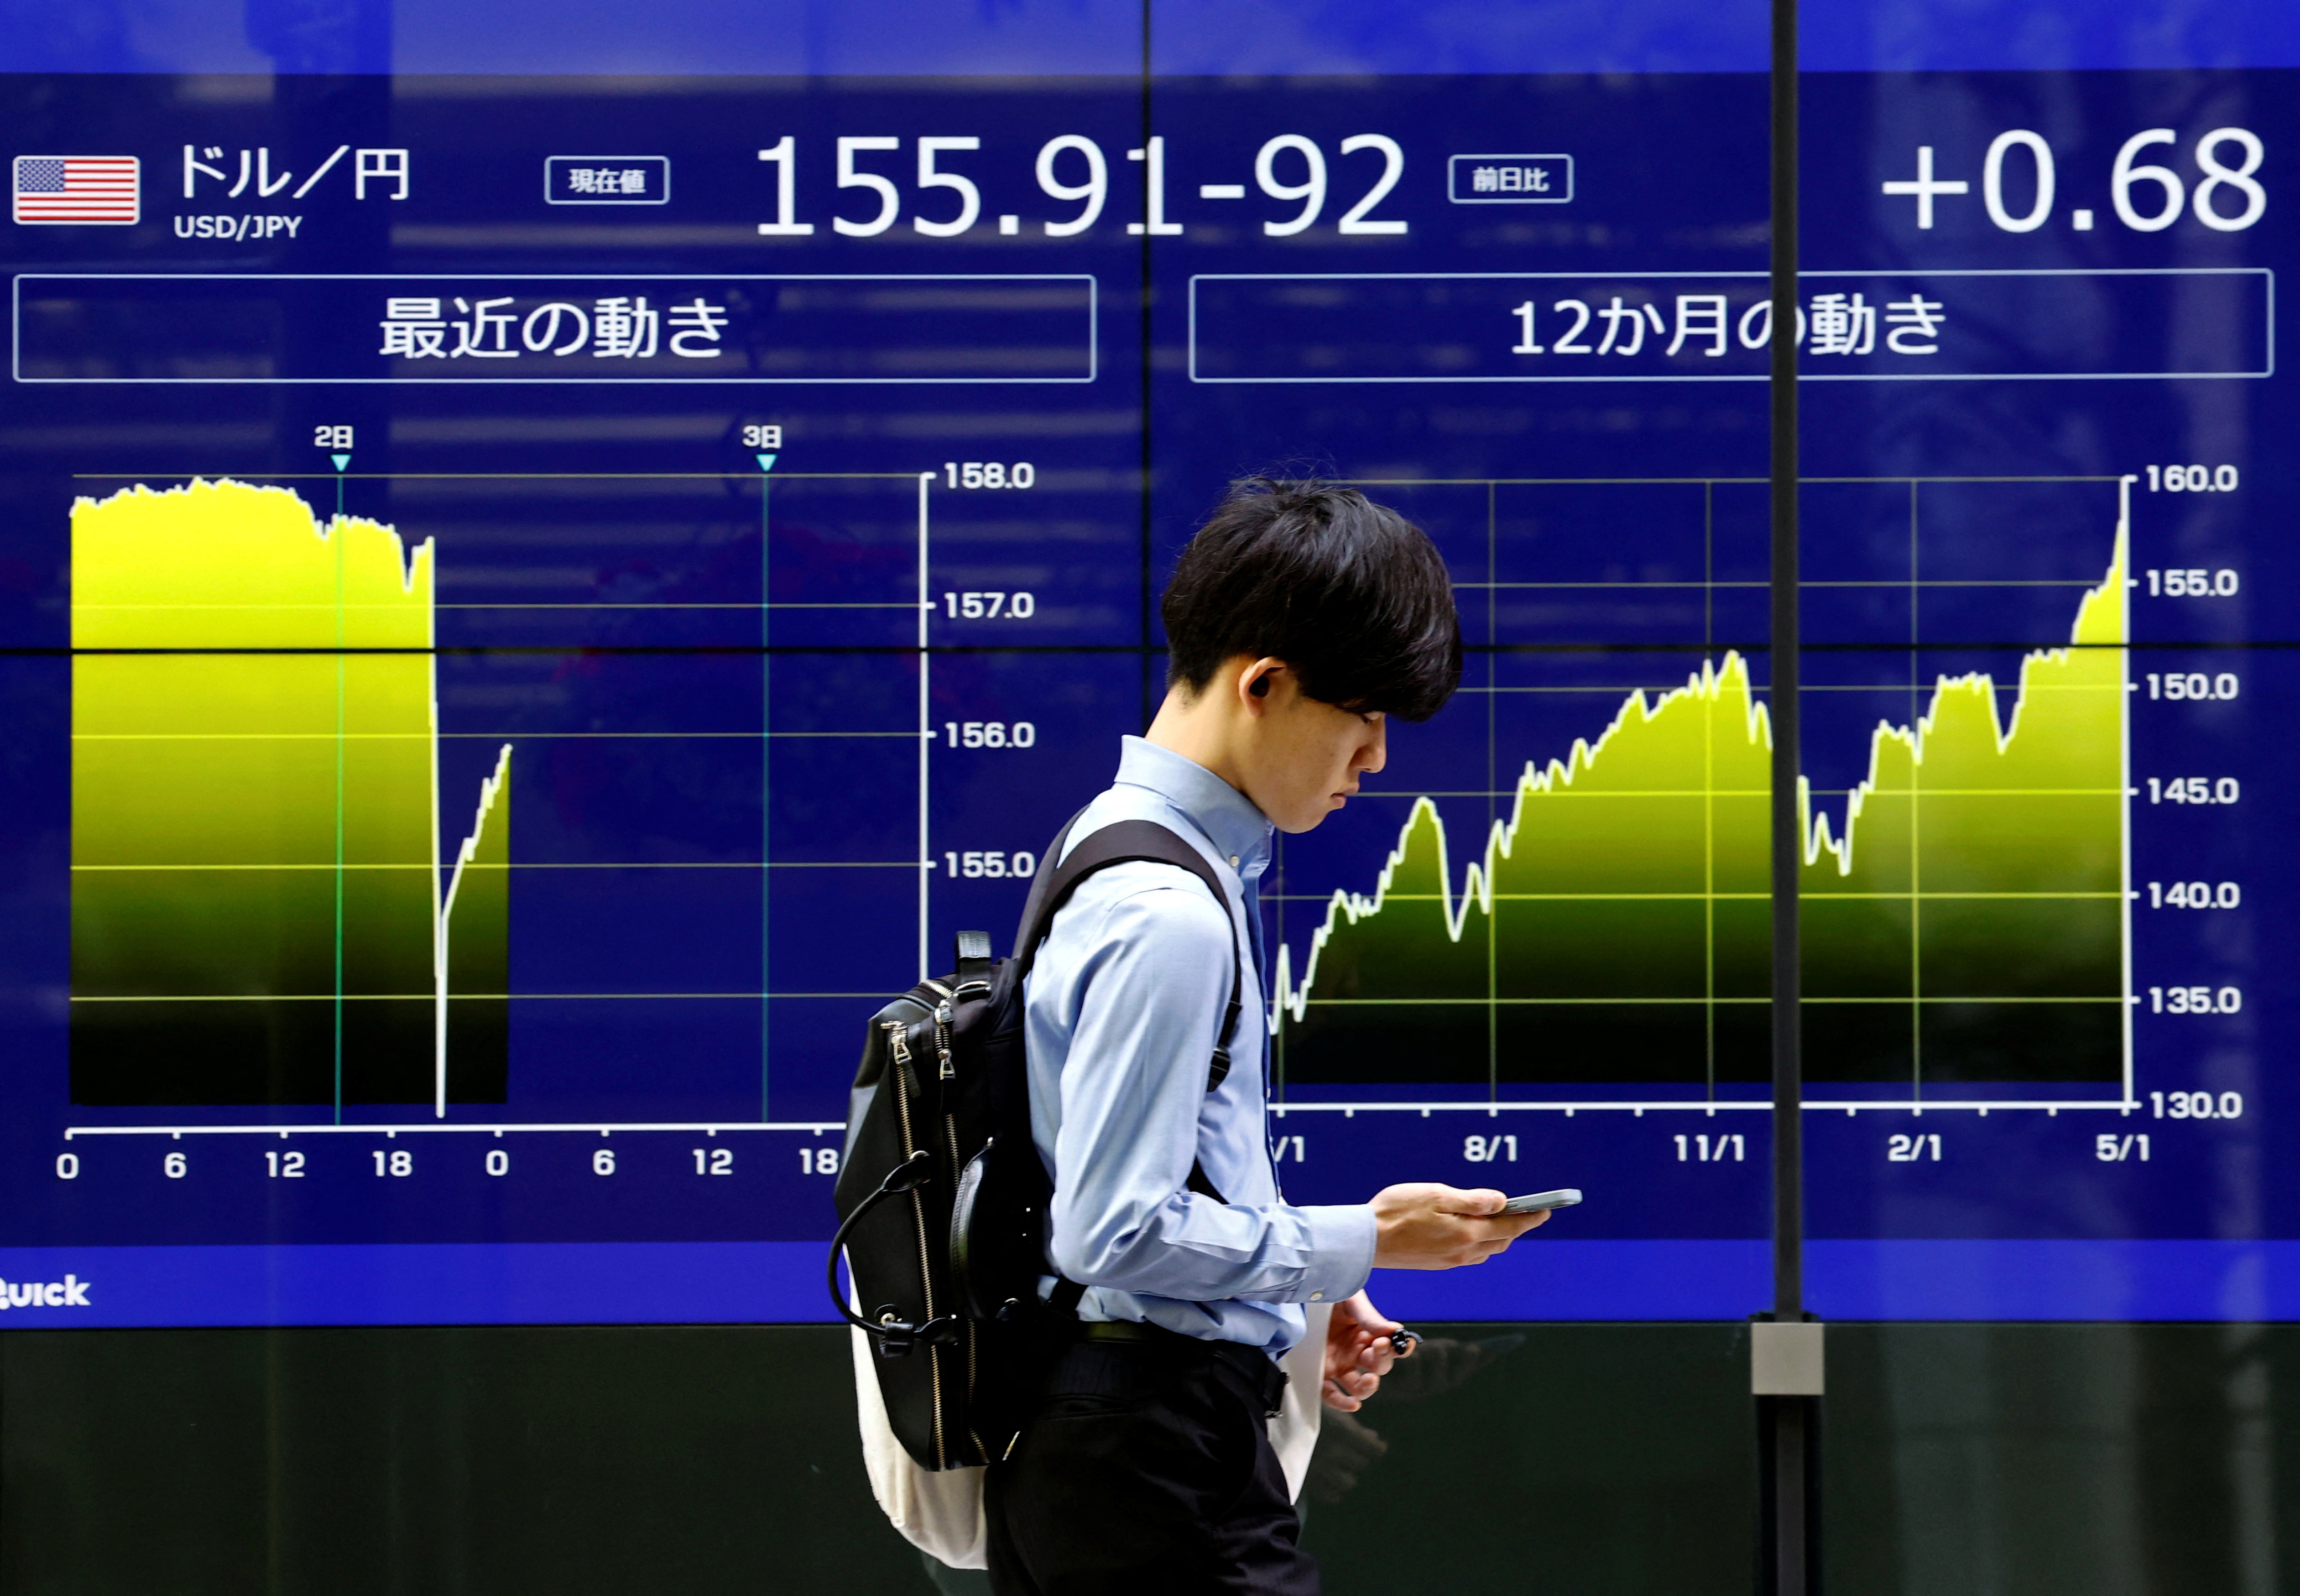 A man walks past an electronic screen displaying the current Japanese Yen exchange rate against the U.S. dollar and the graph showing its recent movement in Tokyo